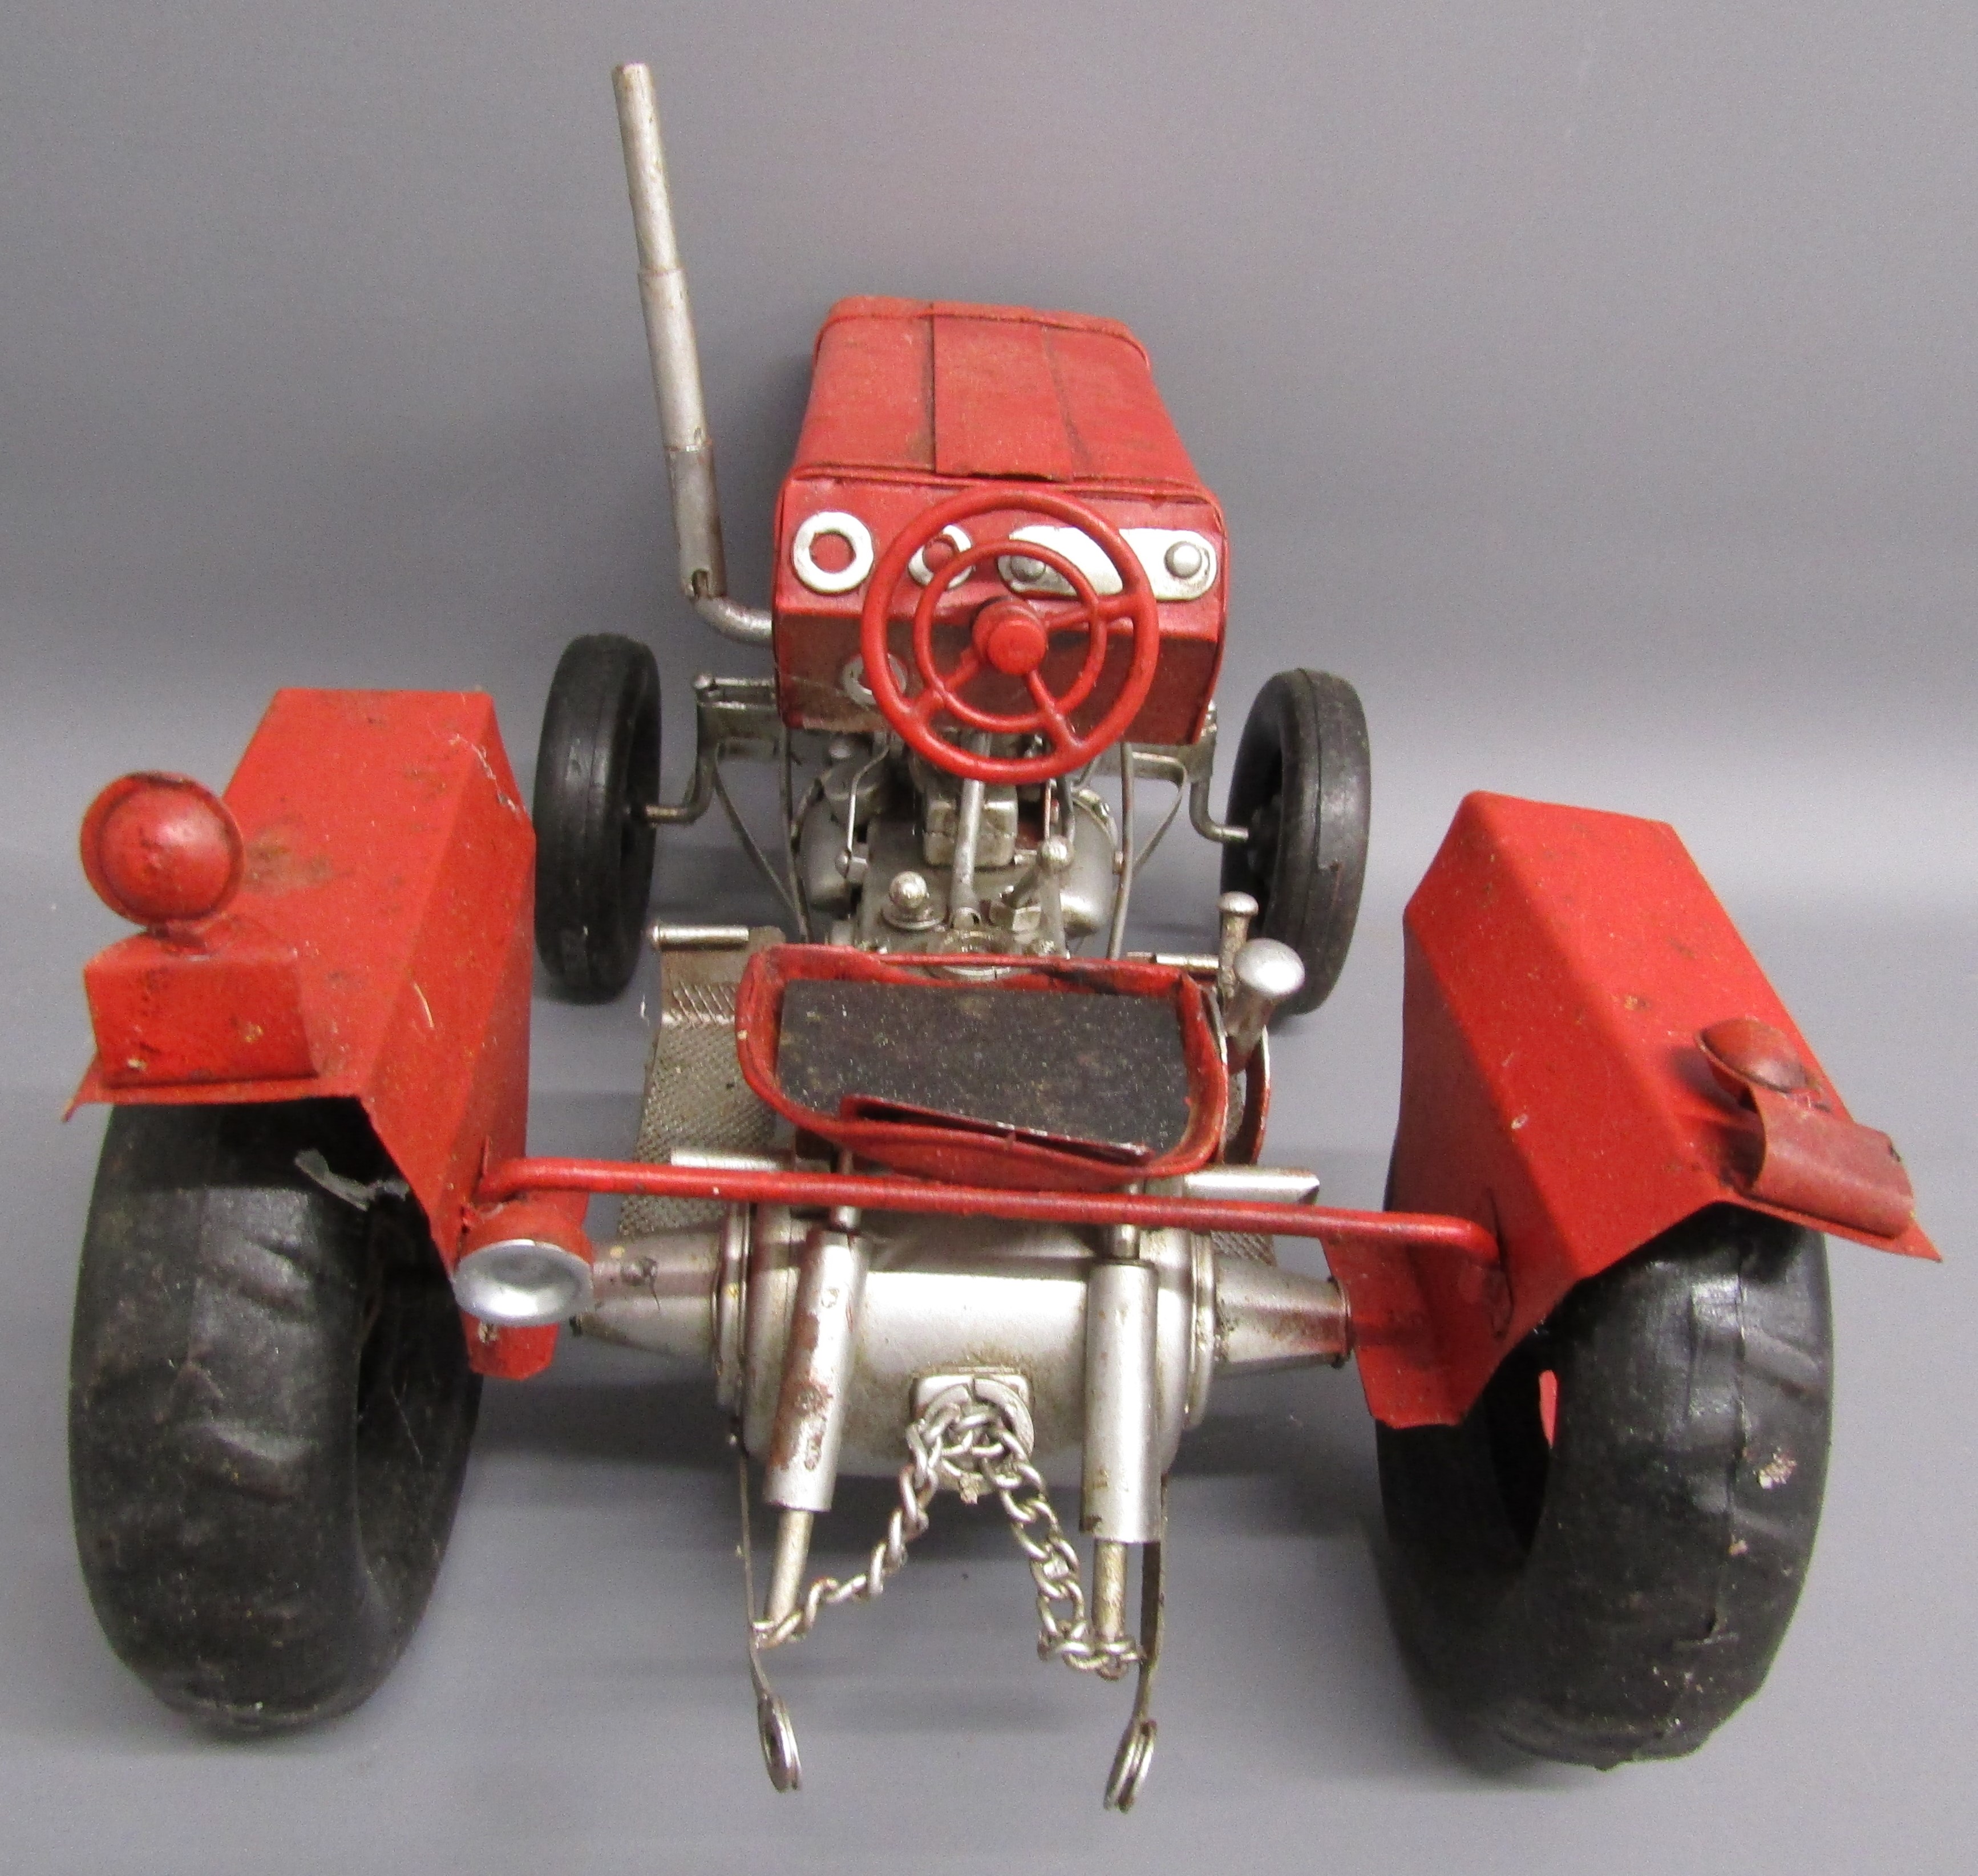 Mamod SE1A stationary steam engine and Massey Ferguson 135 tin tractor - Image 7 of 9